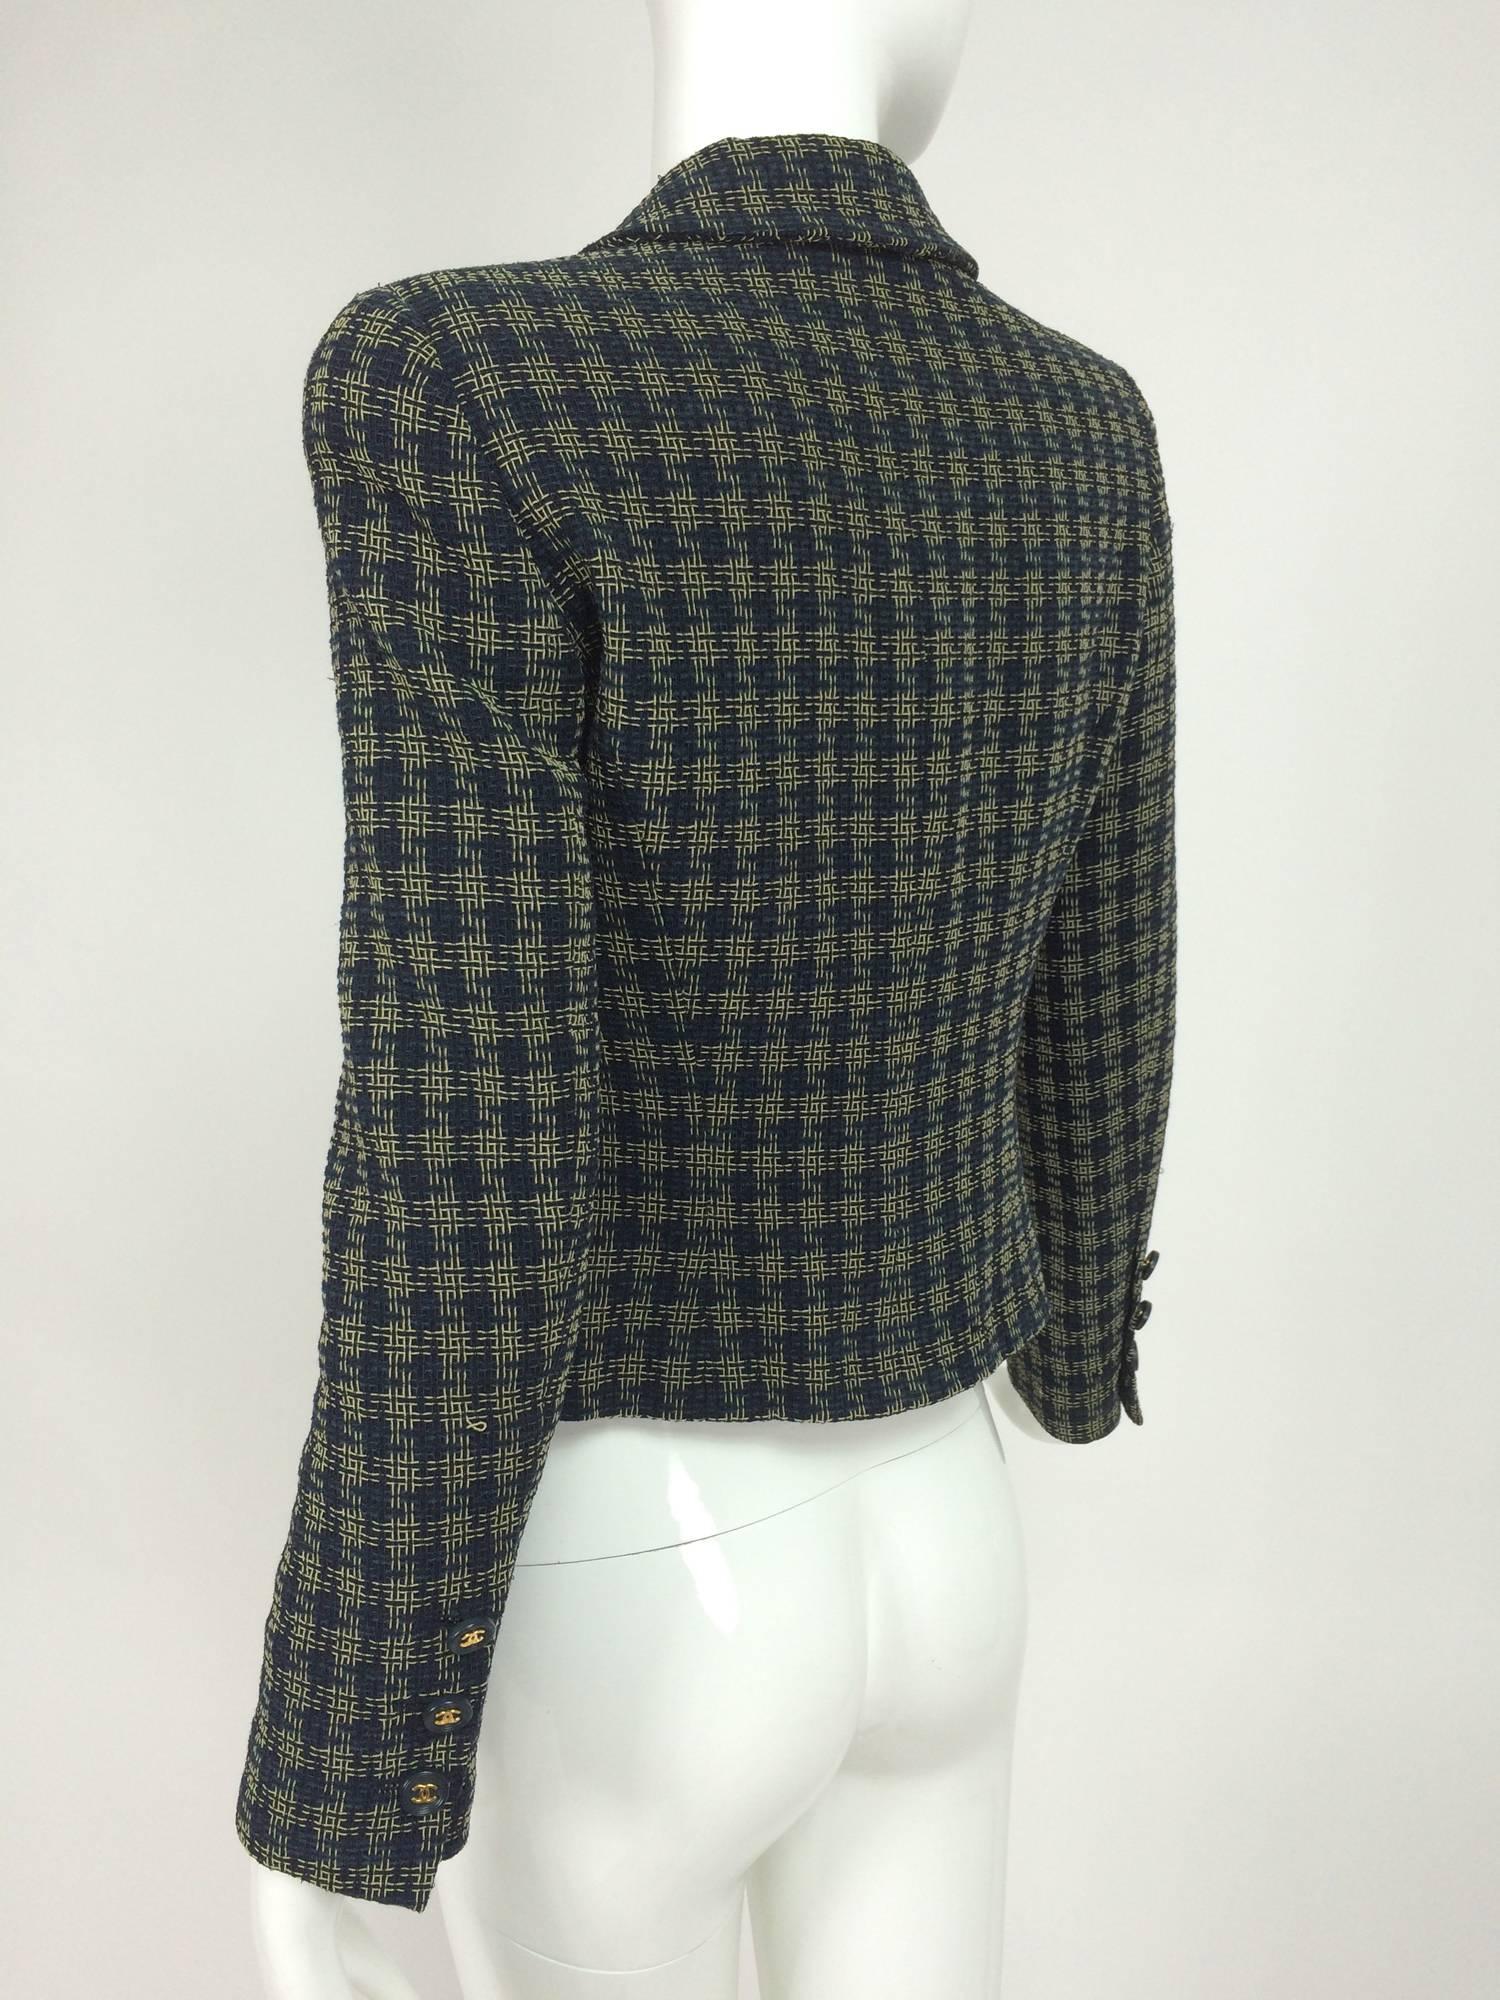 Black Chanel navy & cream open weave check cropped jacket 